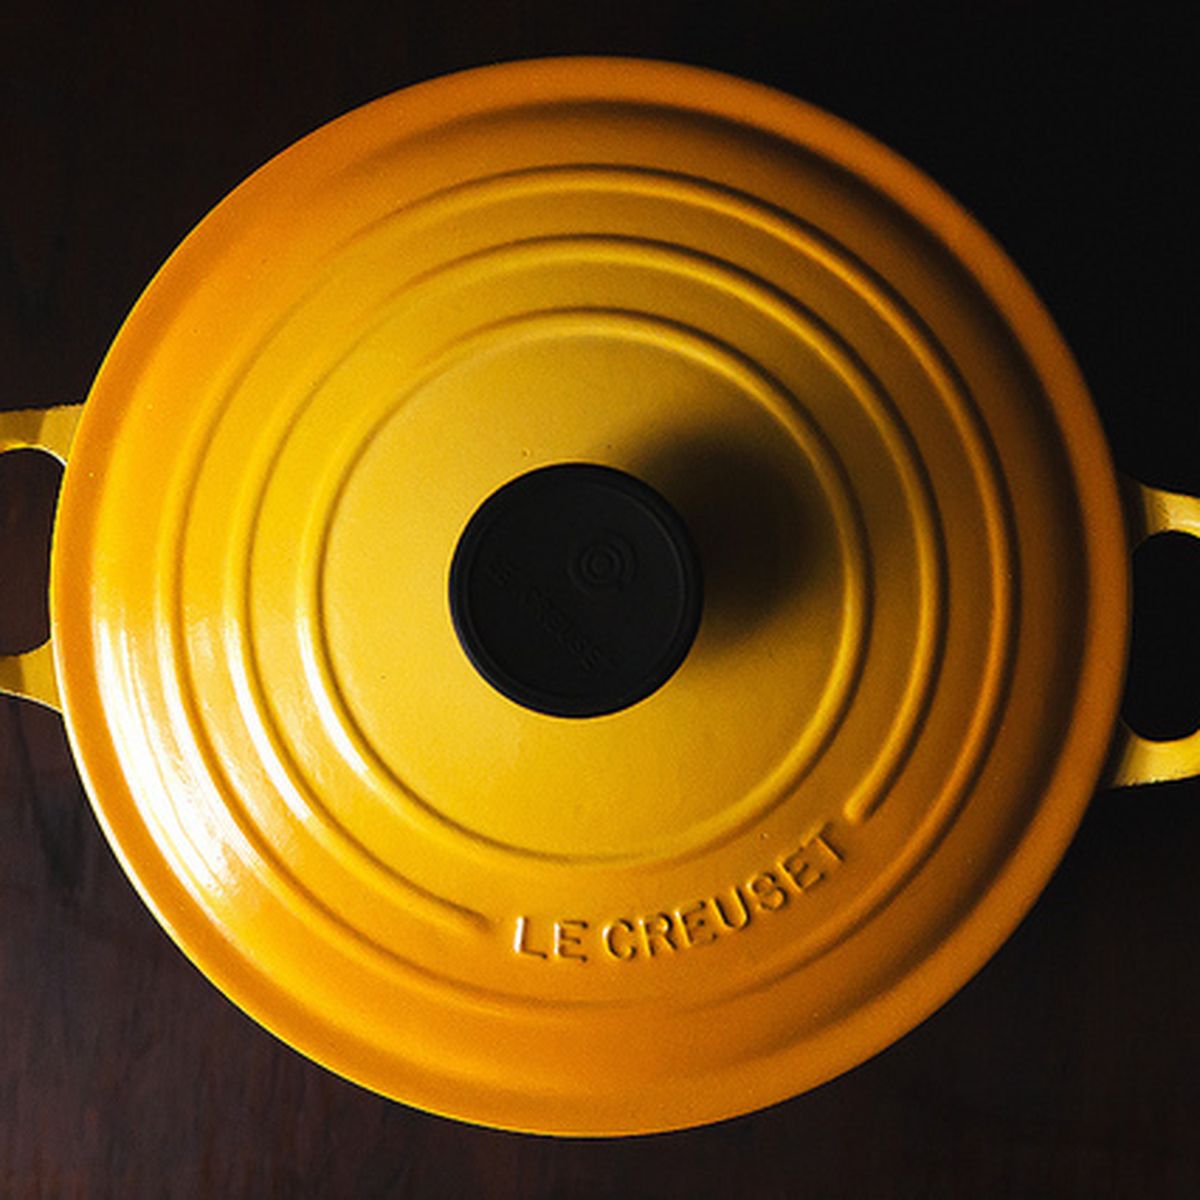 How Do You Clean Le Creuset Cookware?